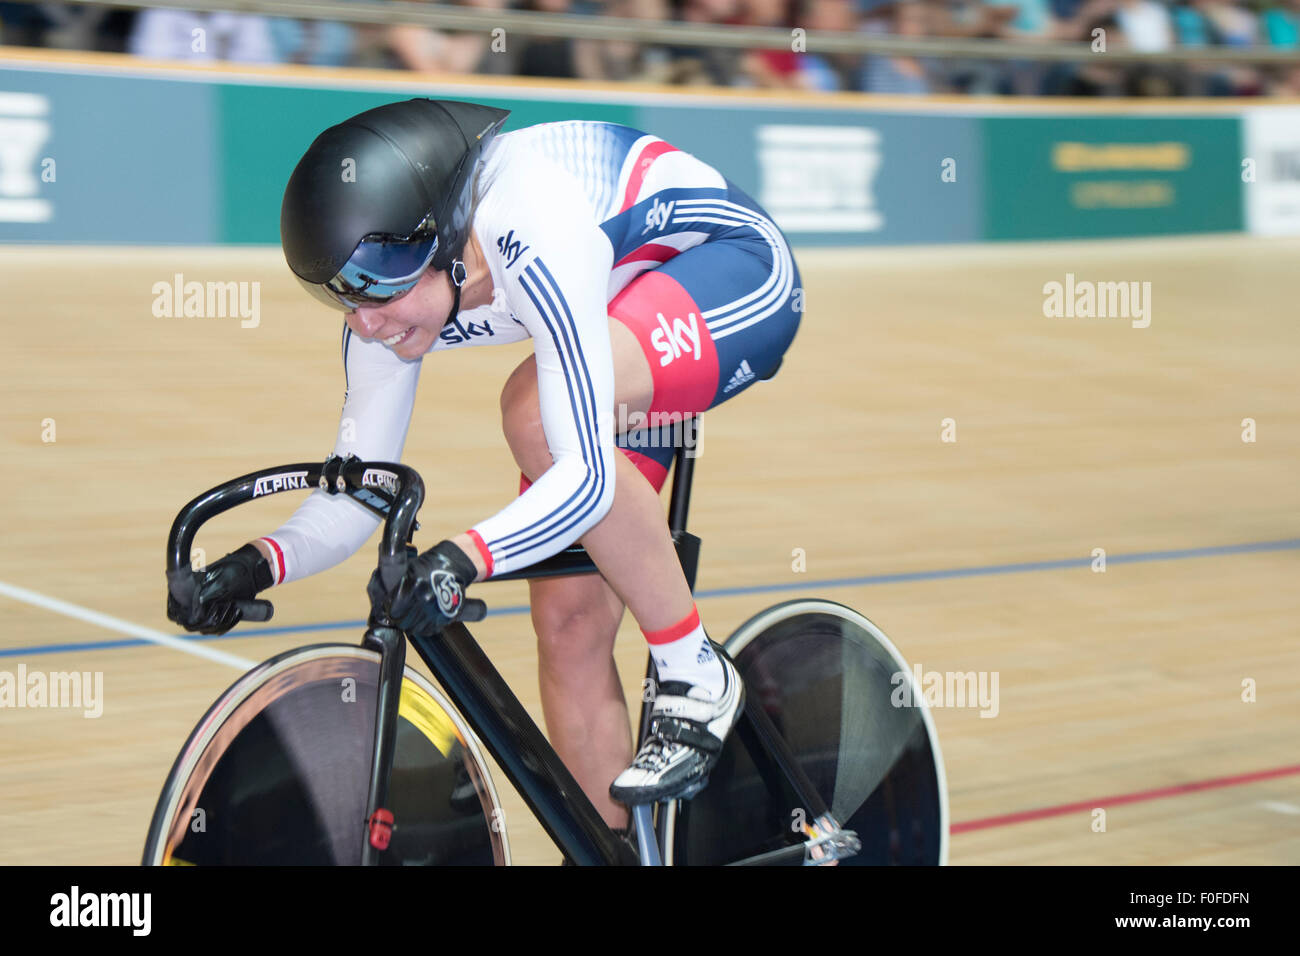 Derby, UK. 14th Aug, 2015. Dannielle Khan competes in the 500m time trial at the Revolution Series at Derby Arena, Derby, United Kingdom on 14 August 2015. The Revolution Series is a professional track racing series featuring many of the world's best track cyclists. This event, taking place over 3 days from 14-16 August 2015, is an important preparation event for the Rio 2016 Olympic Games, allowing British riders to score qualifying points for the Games. Credit:  Andrew Peat/Alamy Live News Stock Photo